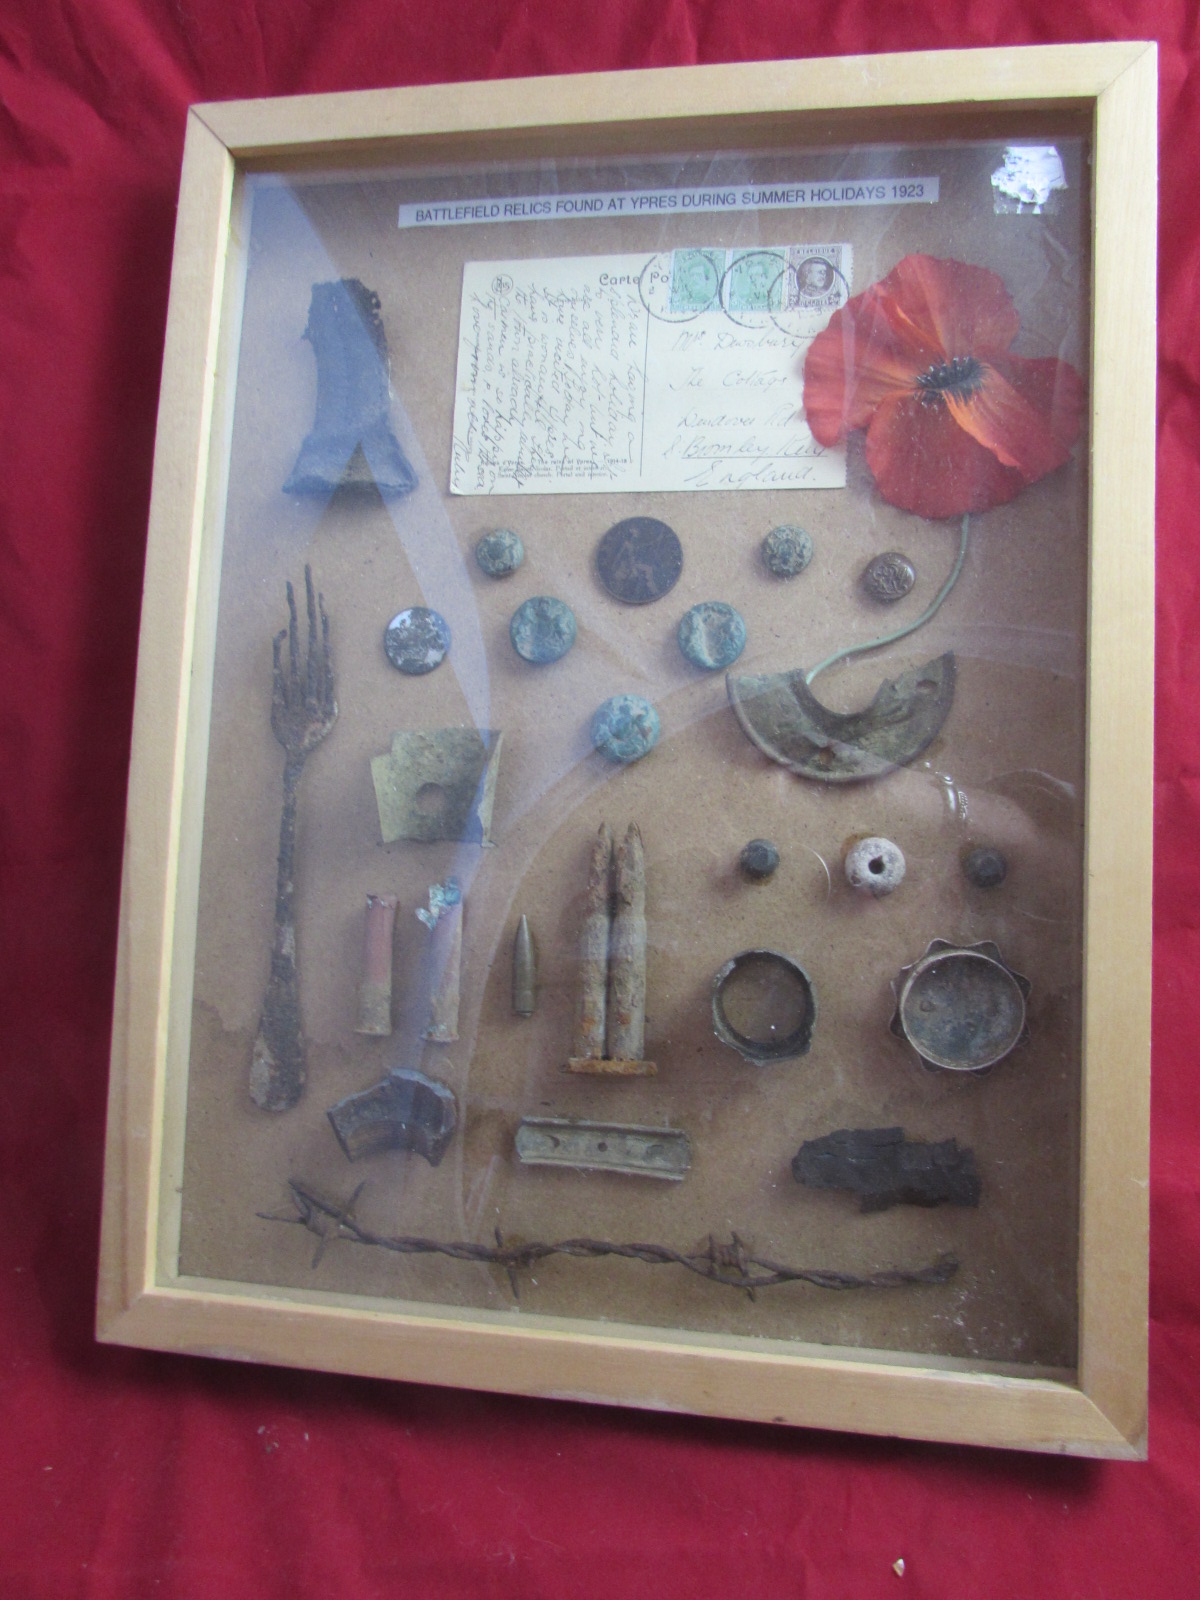 WW1 Battlefield Relics Found at Ypres